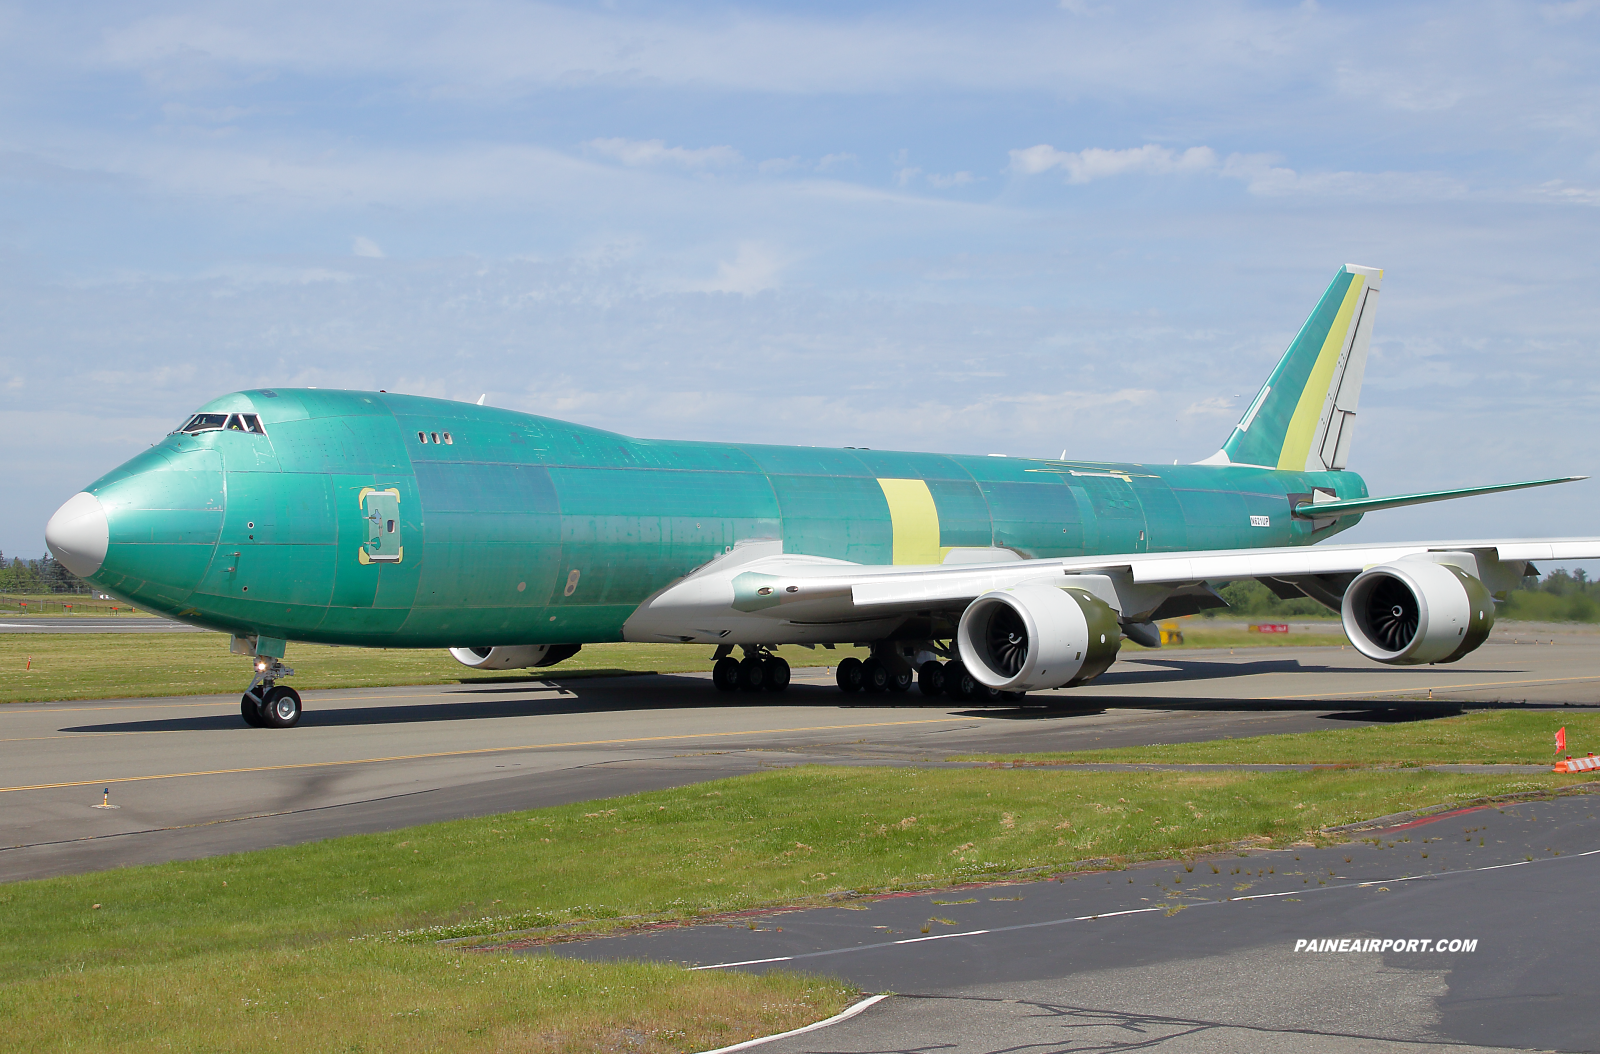 UPS 747-8F N621UP at Paine Field